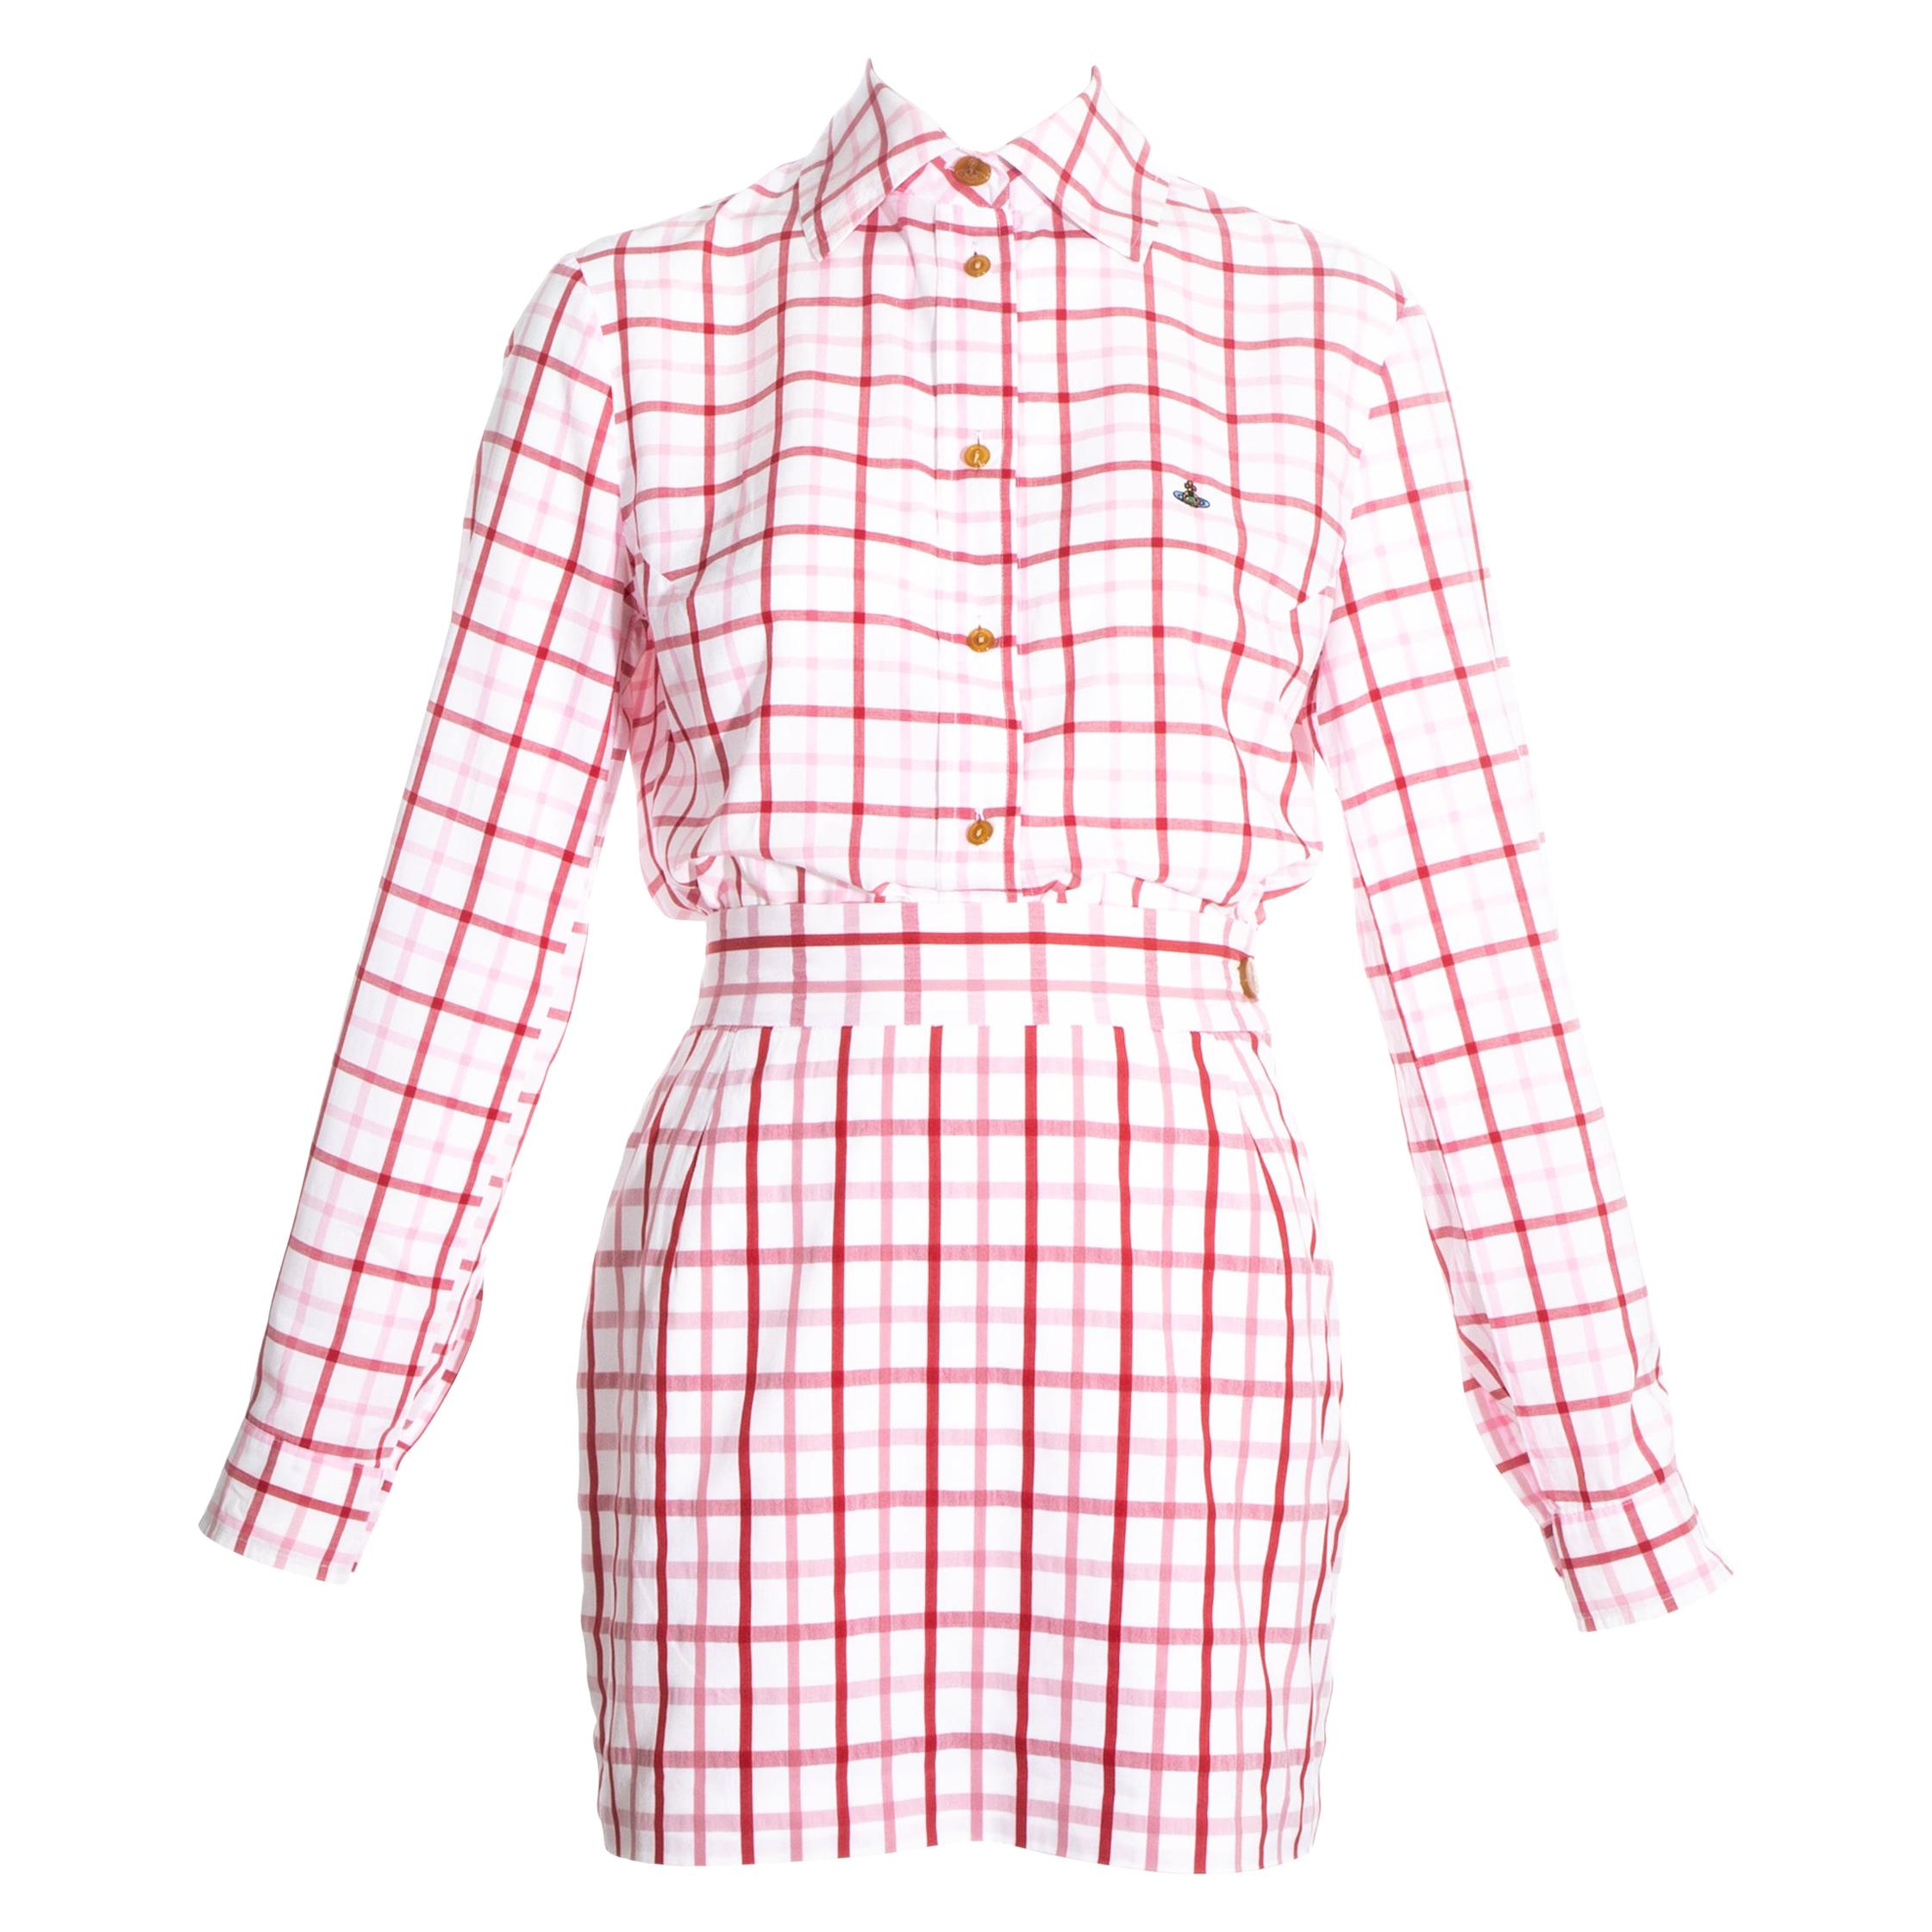 Vivienne Westwood pink and red checked cotton skirt suit, ss 1994